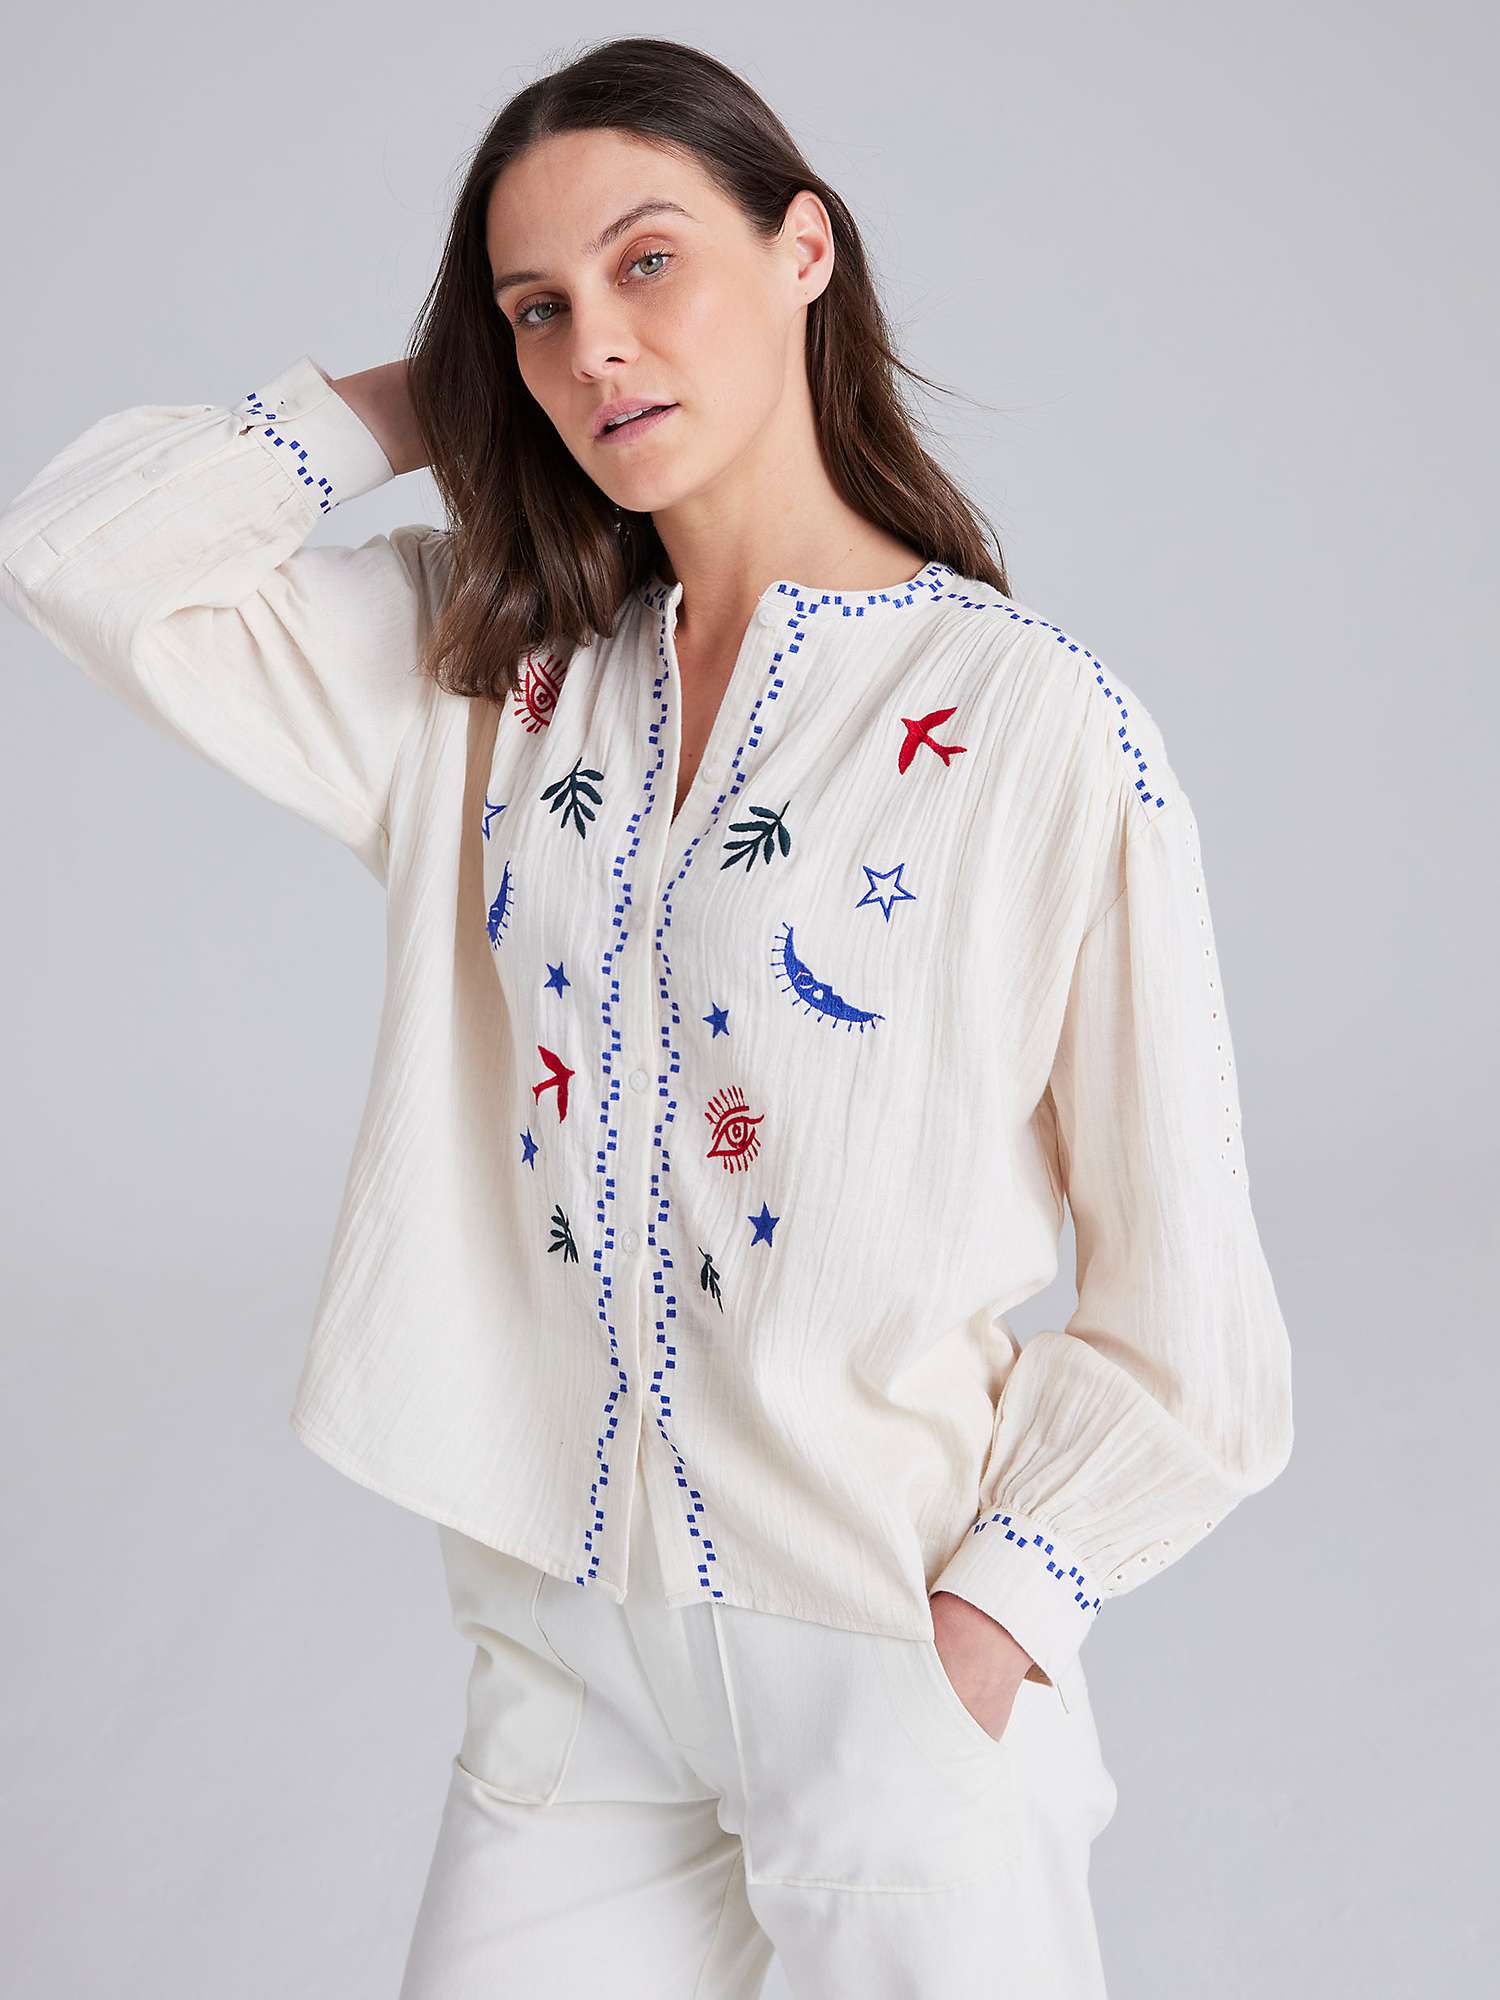 Buy Cape Cove Butterfly Embroidered Blouse, Cream Online at johnlewis.com